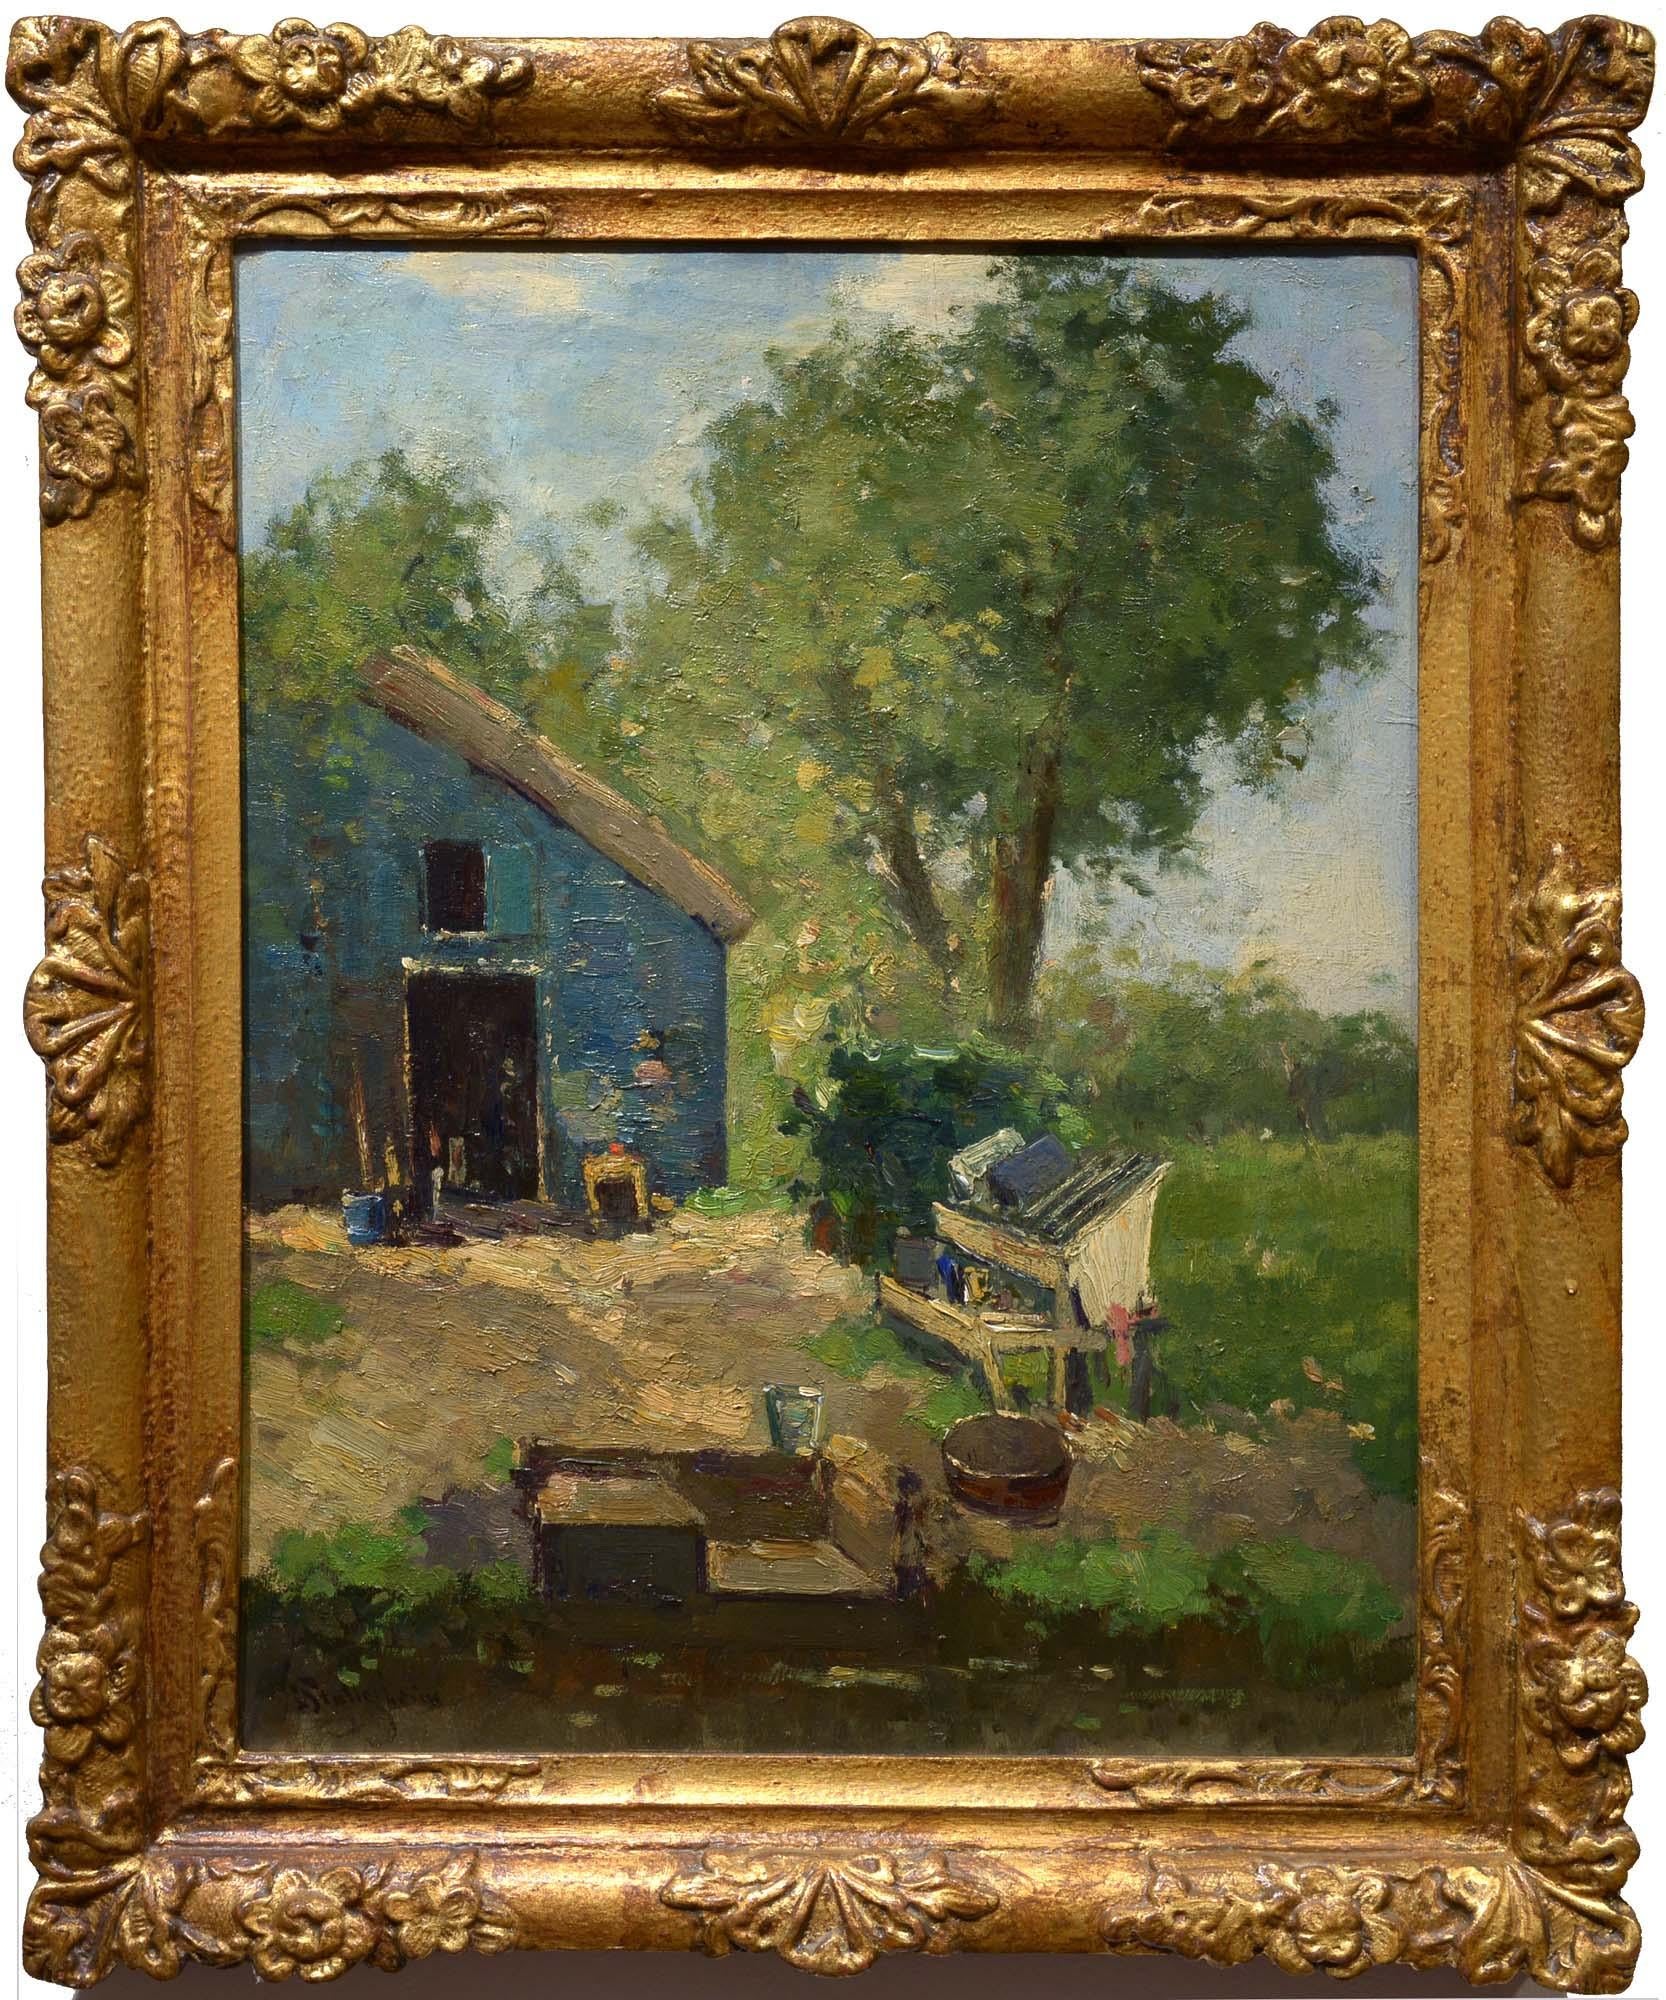 Dutch artist Louis Stütterheim was born in 1873 in Rotterdam. His full name was Lodewijk Philippus Stütterheim. Stütterheim started painting at the age of 15. He worked at a trade office and also studied at the Academy for Visual Arts in Rotterdam.